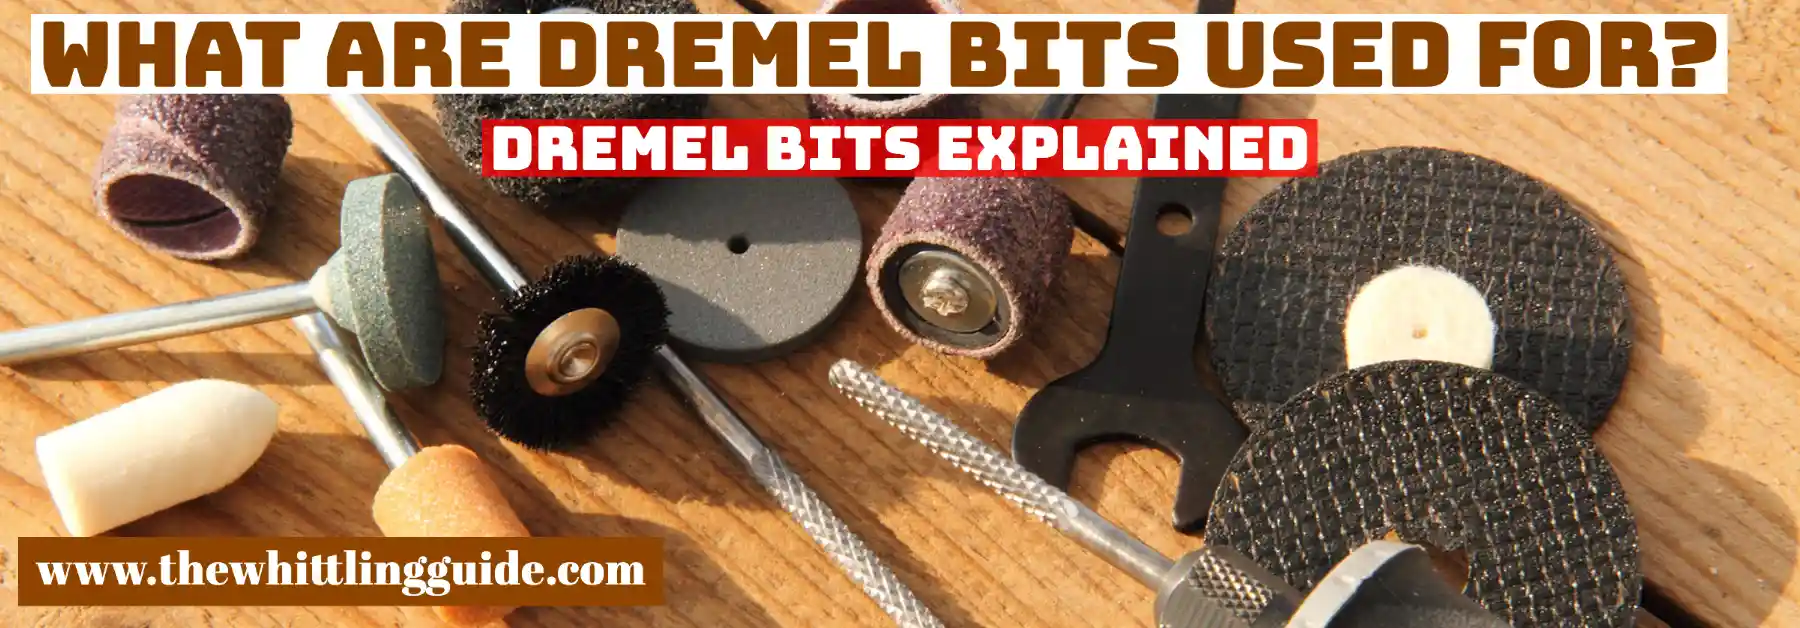 What are the different Dremel bits used for